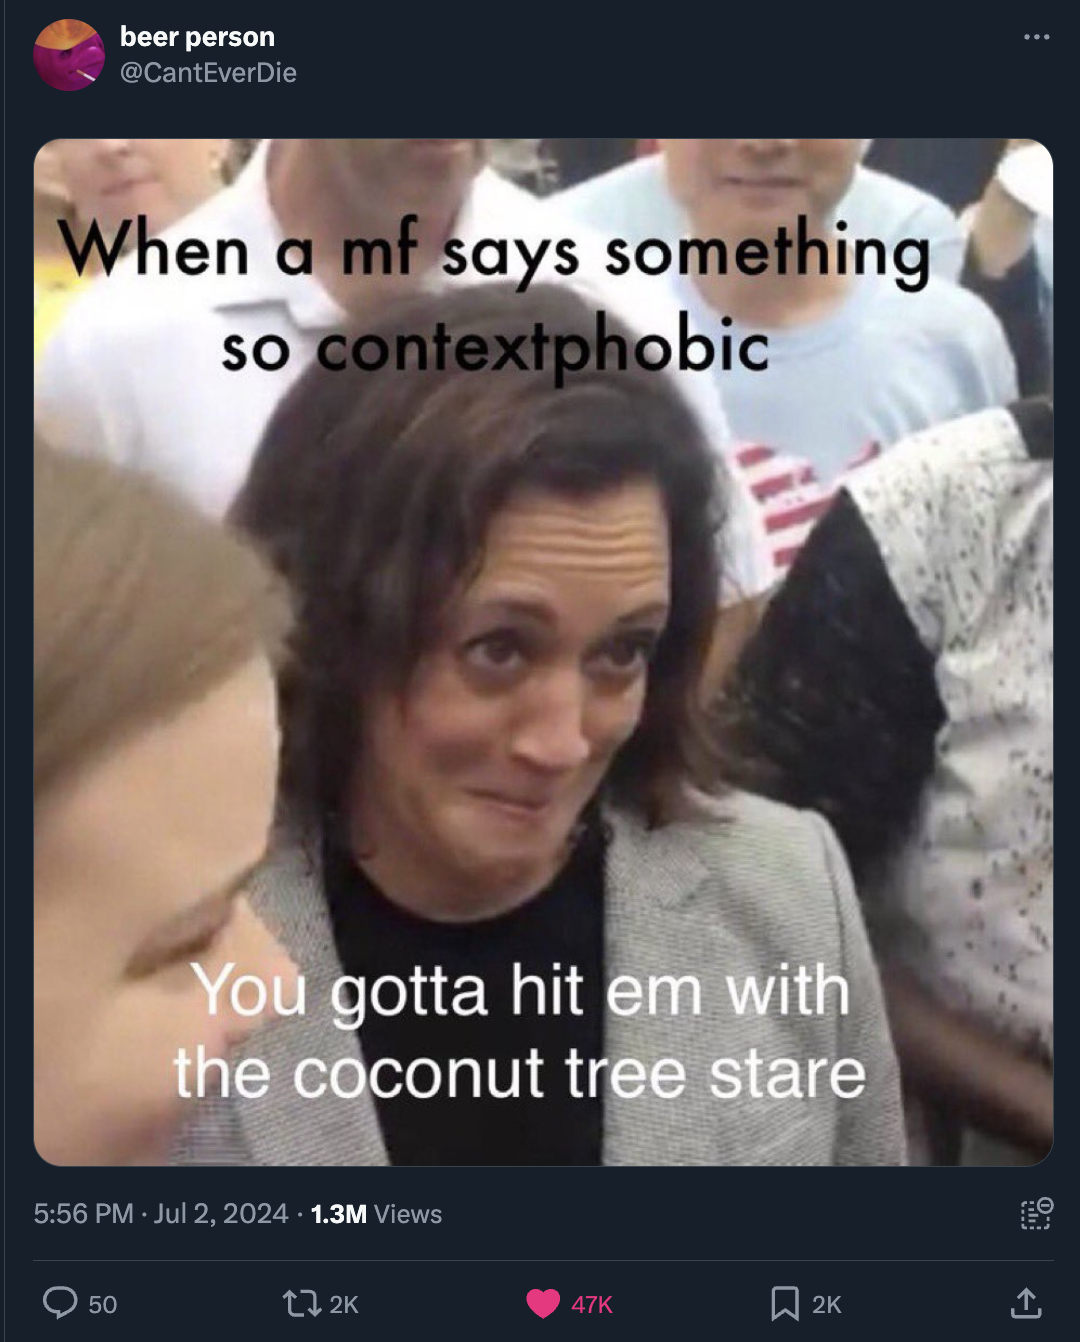 contextphobic coconut tree stare - beer person When a mf says something so contextphobic You gotta hit em with the coconut tree stare 1.3M Views 47K 2K